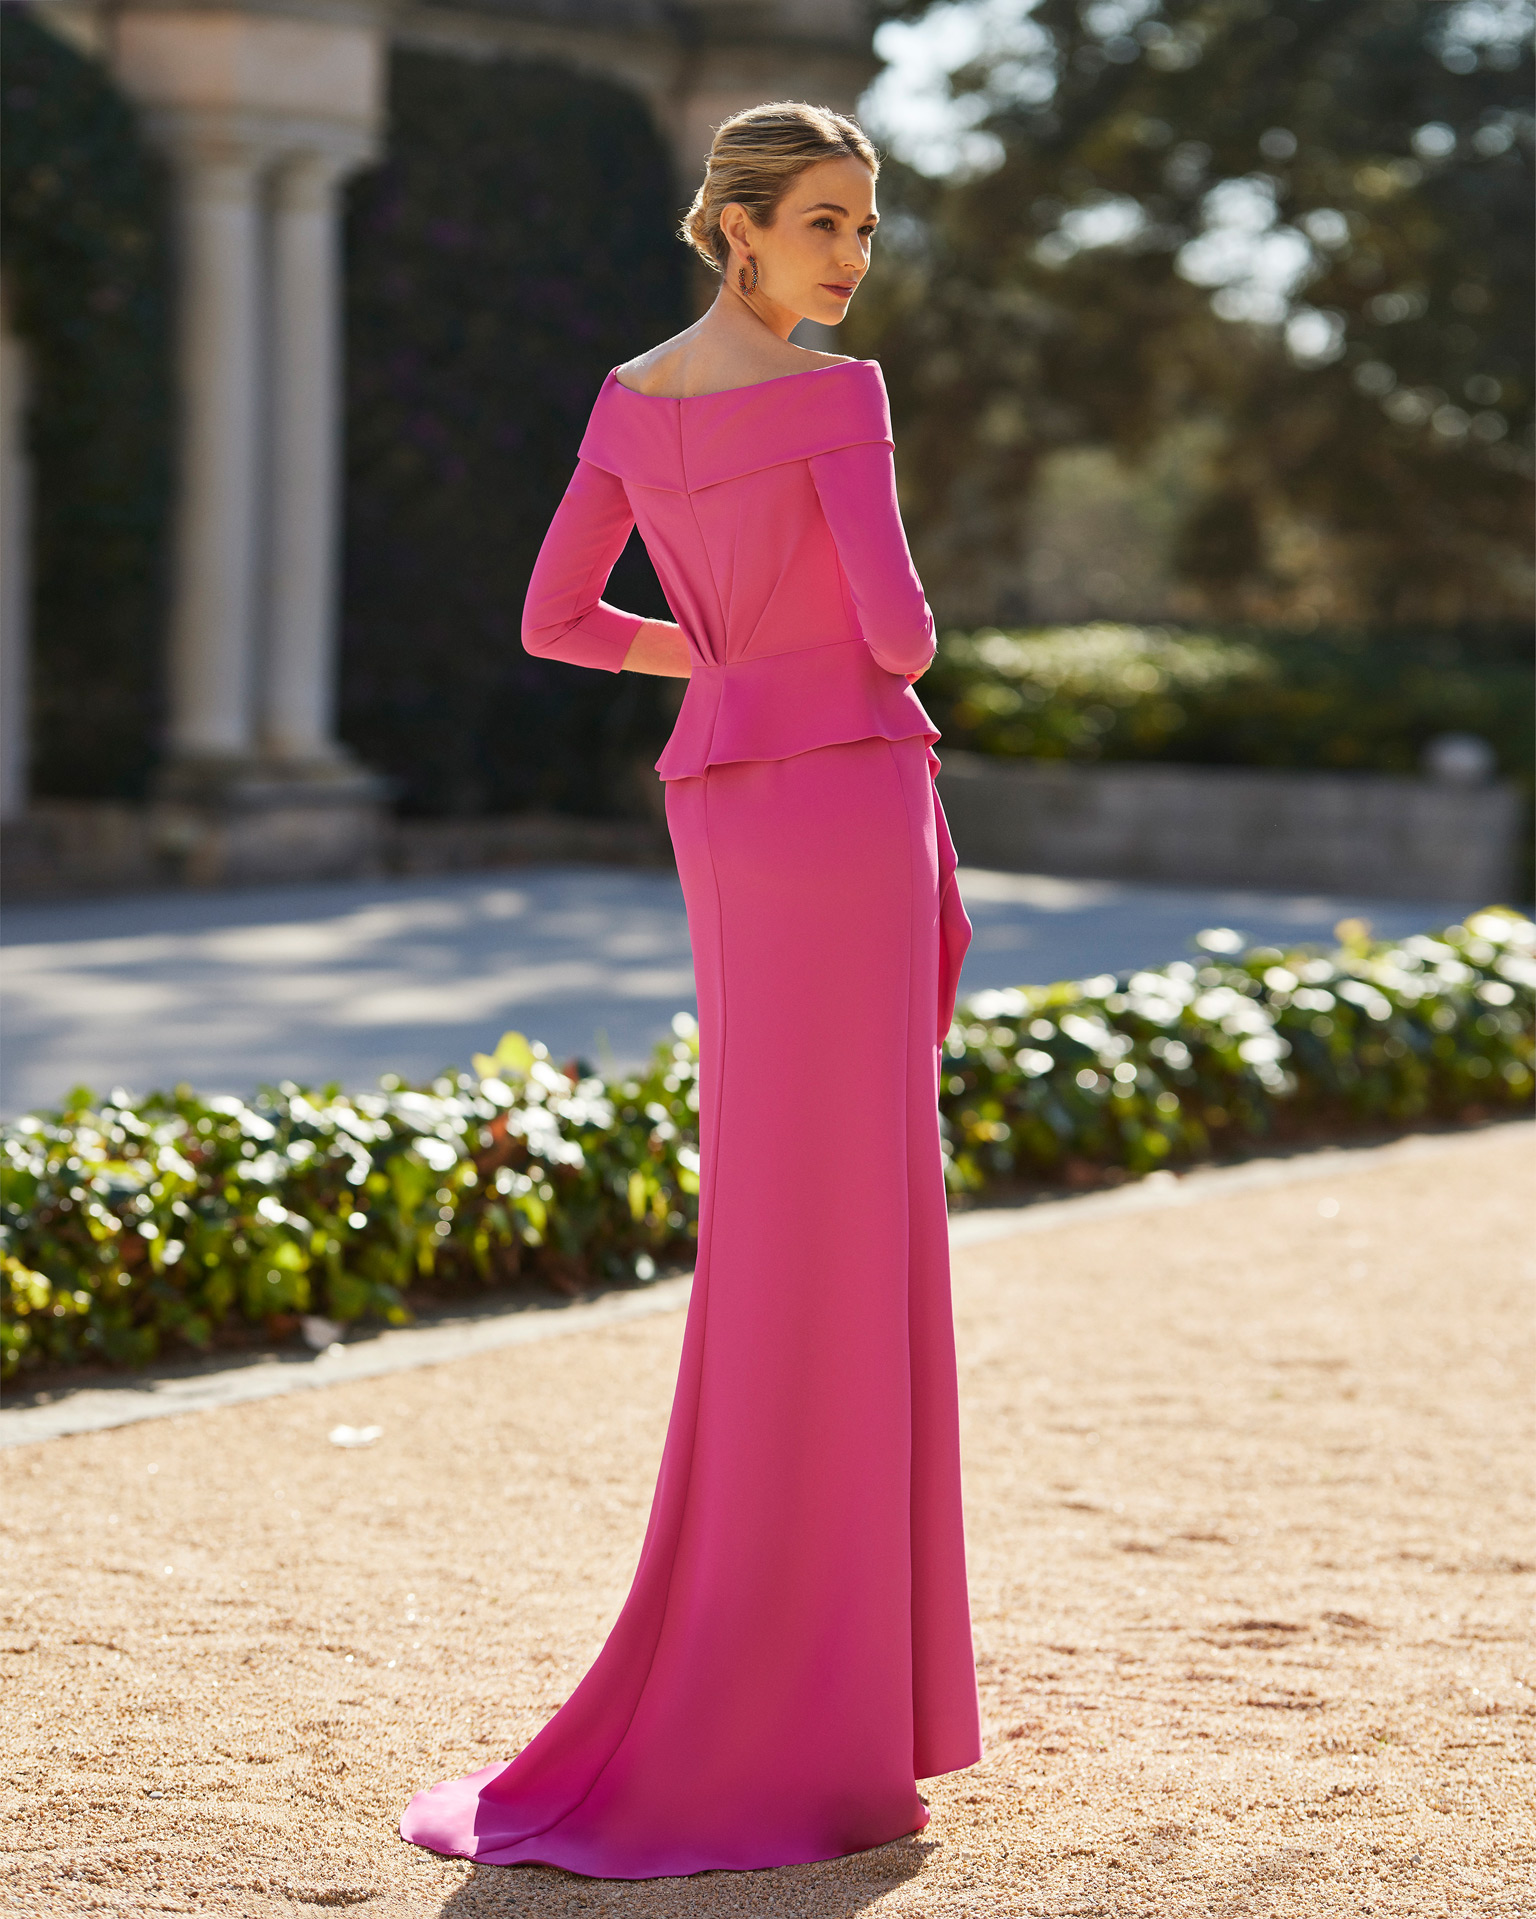 Elegant long cocktail dress. Crafted in crêpe. With off-the-shoulder neckline and three-quarter sleeves with side slit. Couture Club design. MARFIL_BARCELONA.